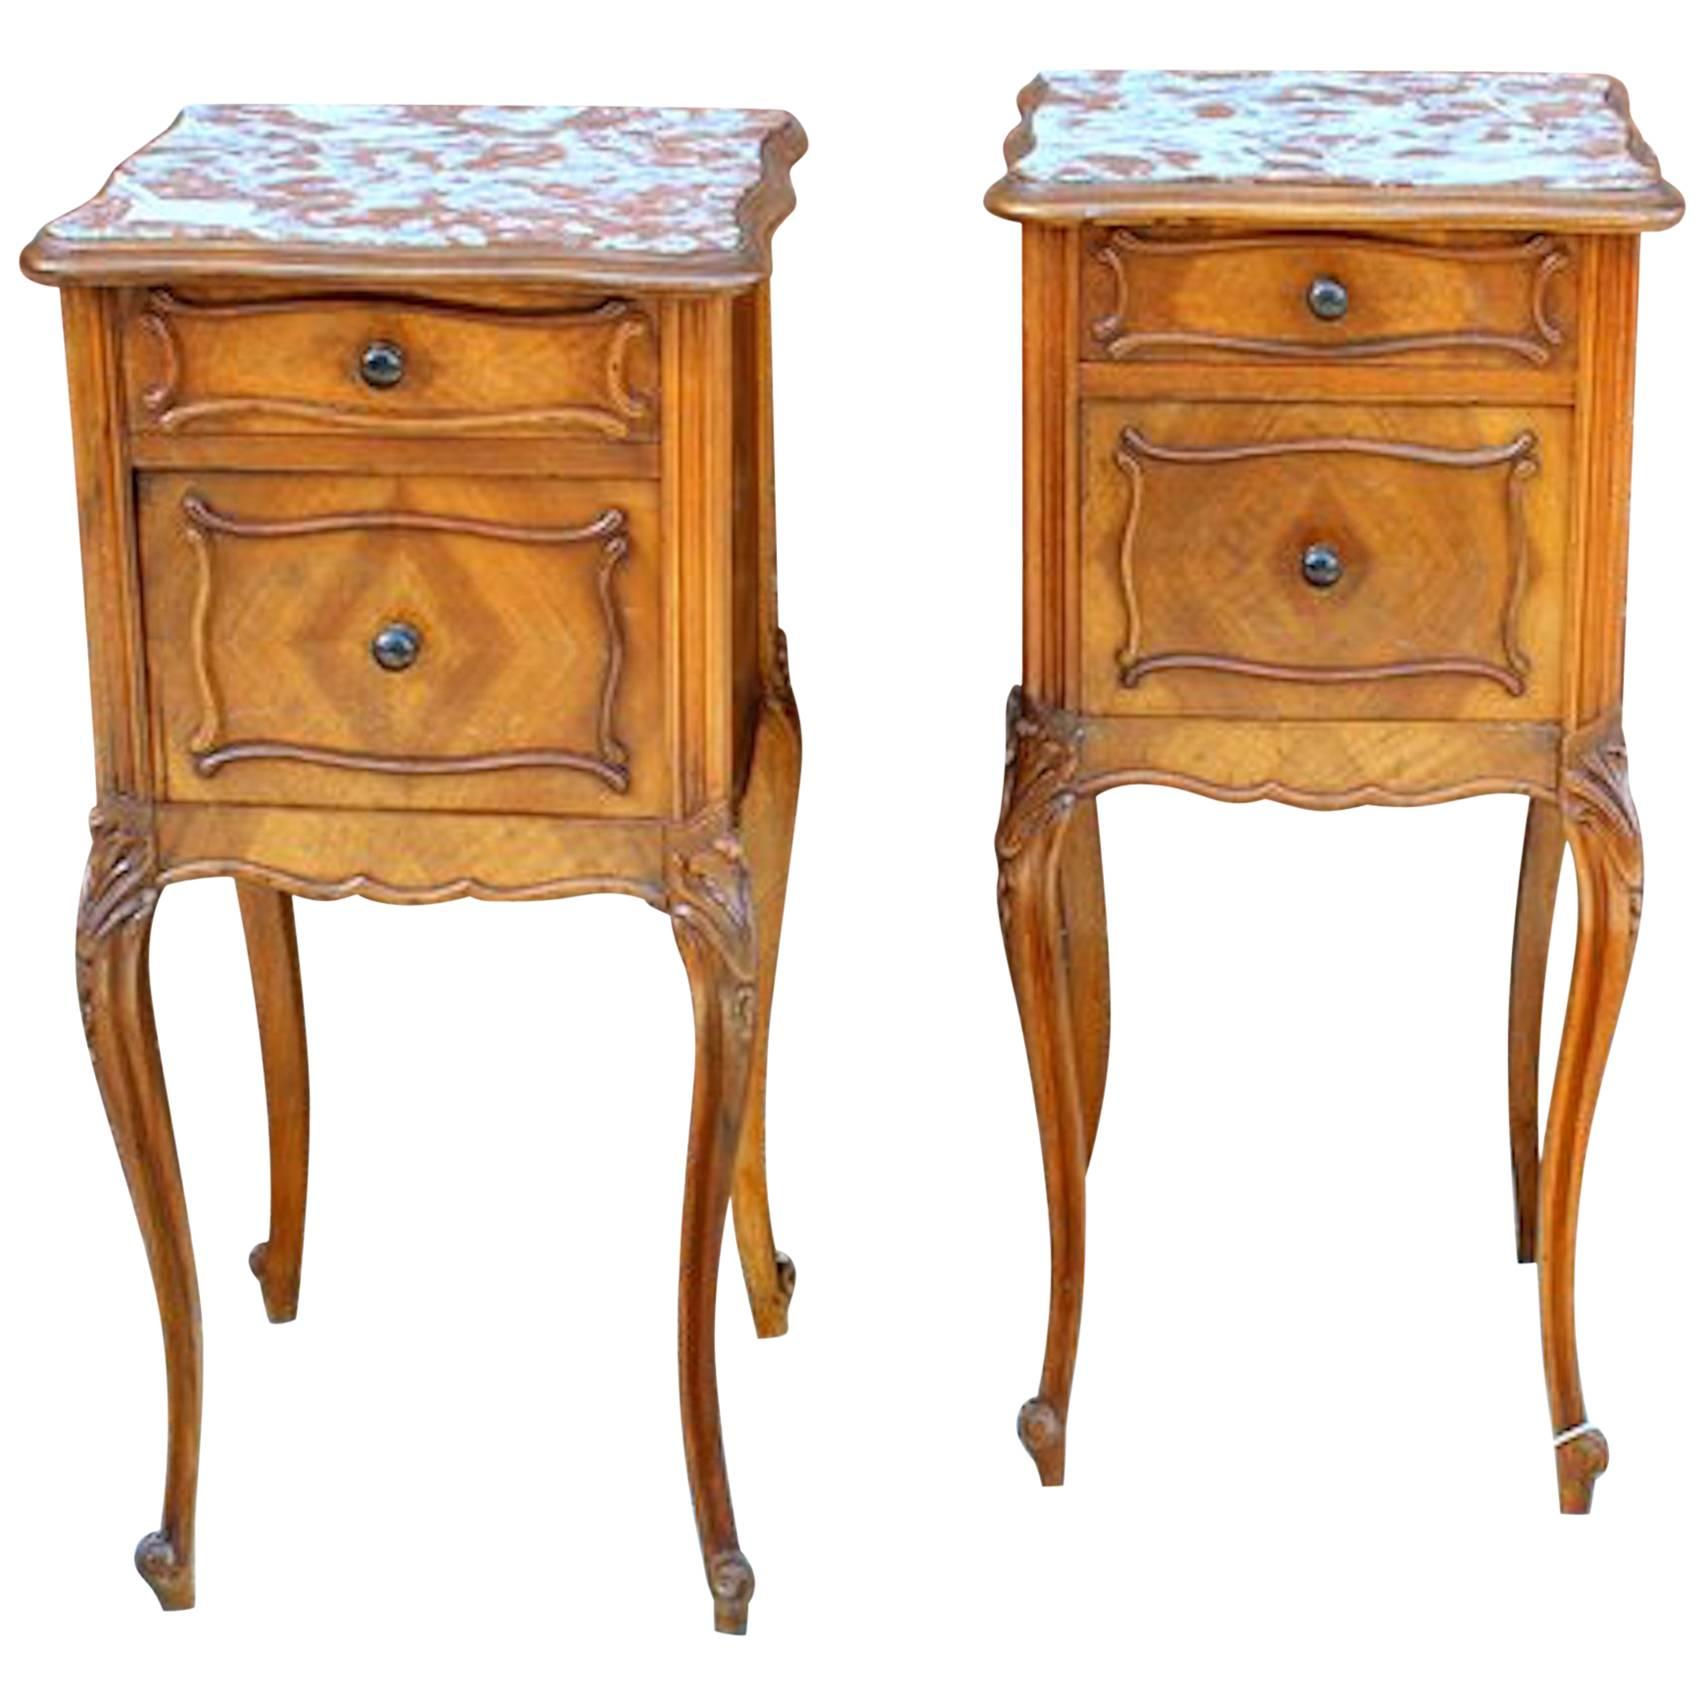 Pair of French Walnut Louis XV Style Marble Top Bedside/Chairside Tables